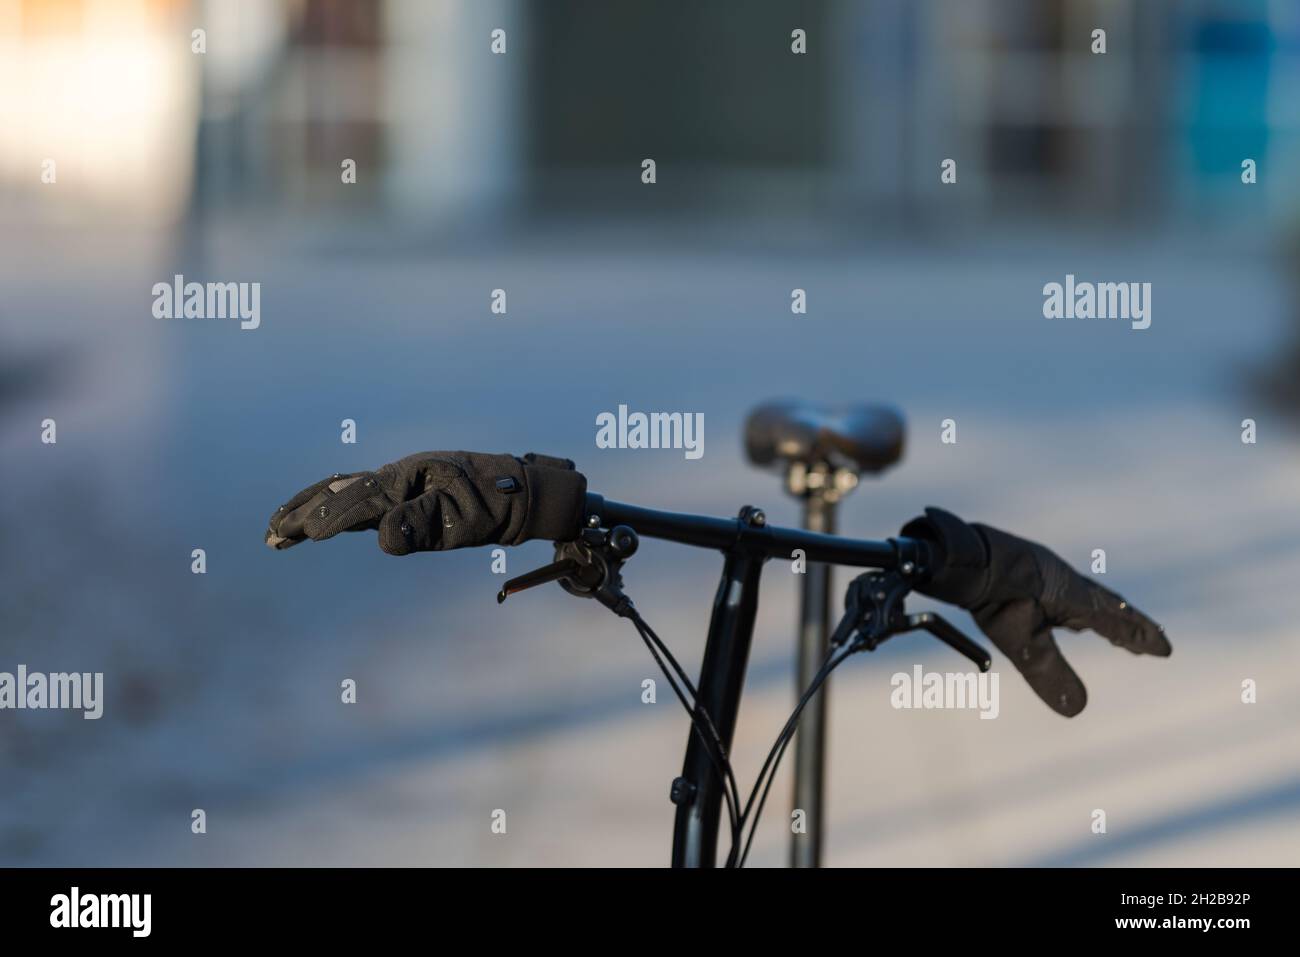 Black pair of modern synthetic gloves stuck on handlebar of folding bike standing in suburban area with blurred background on cold sunny winter mornin Stock Photo